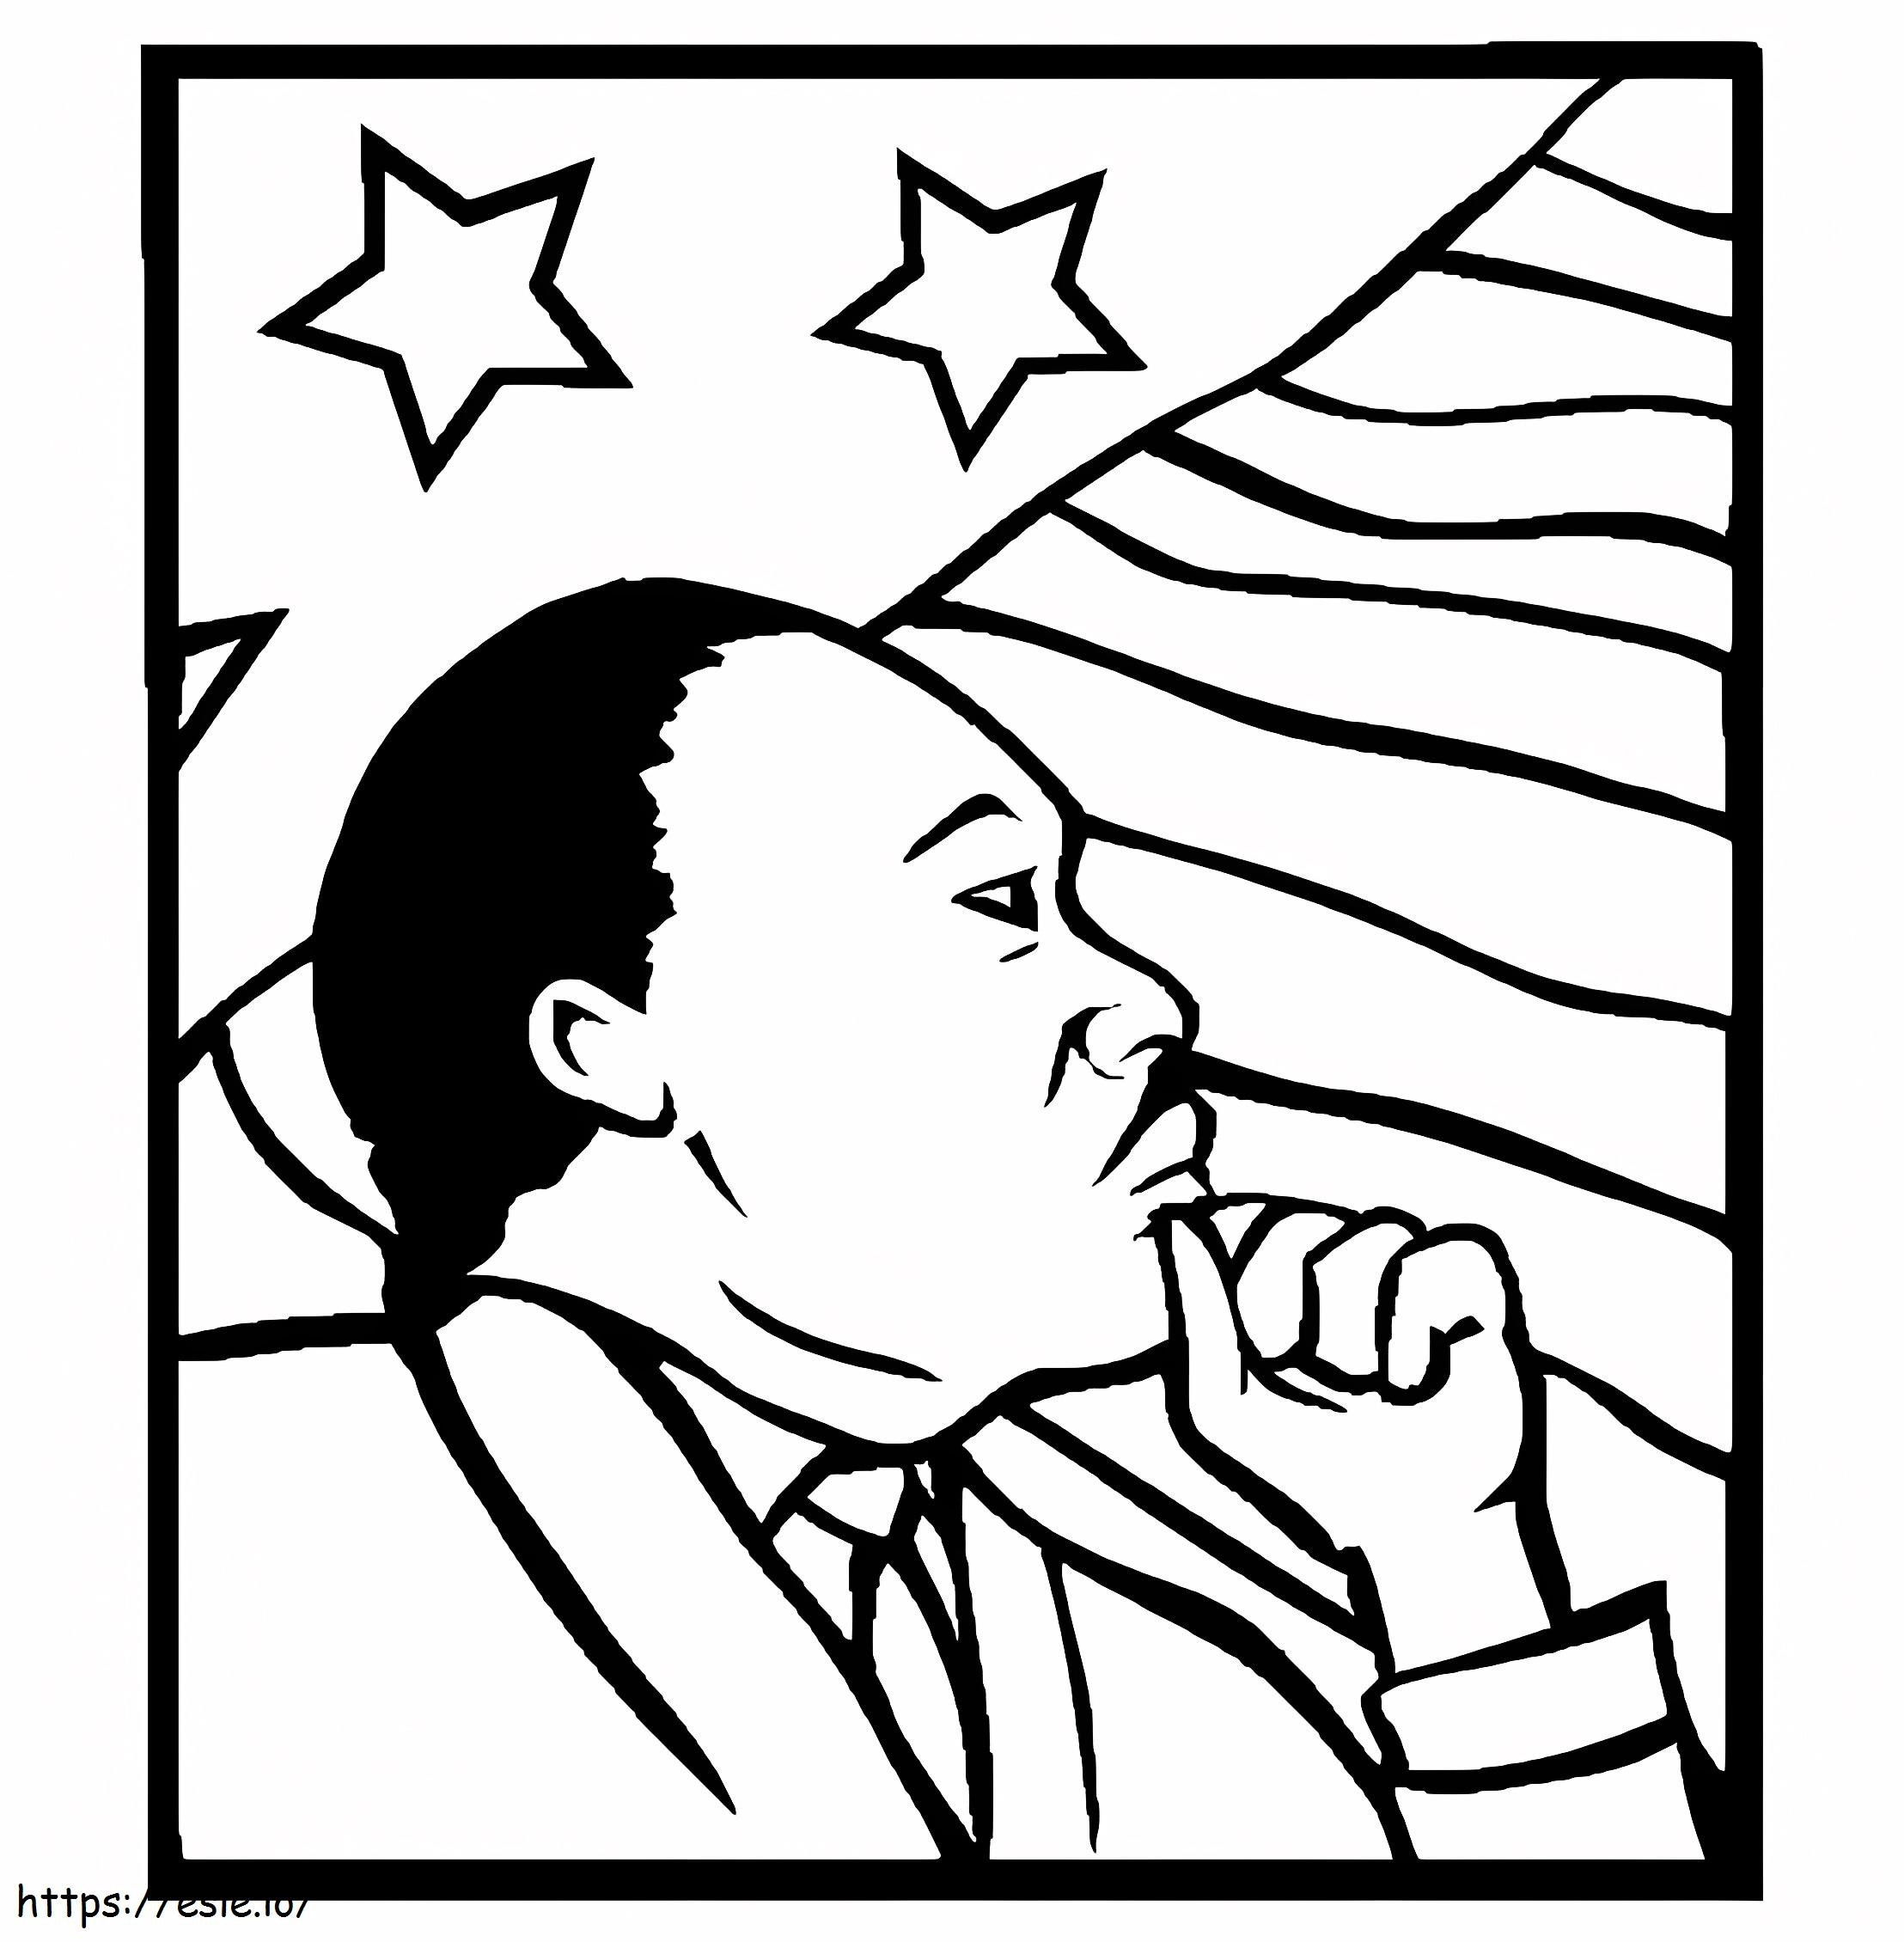 Martin Luther King Jr 1 coloring page